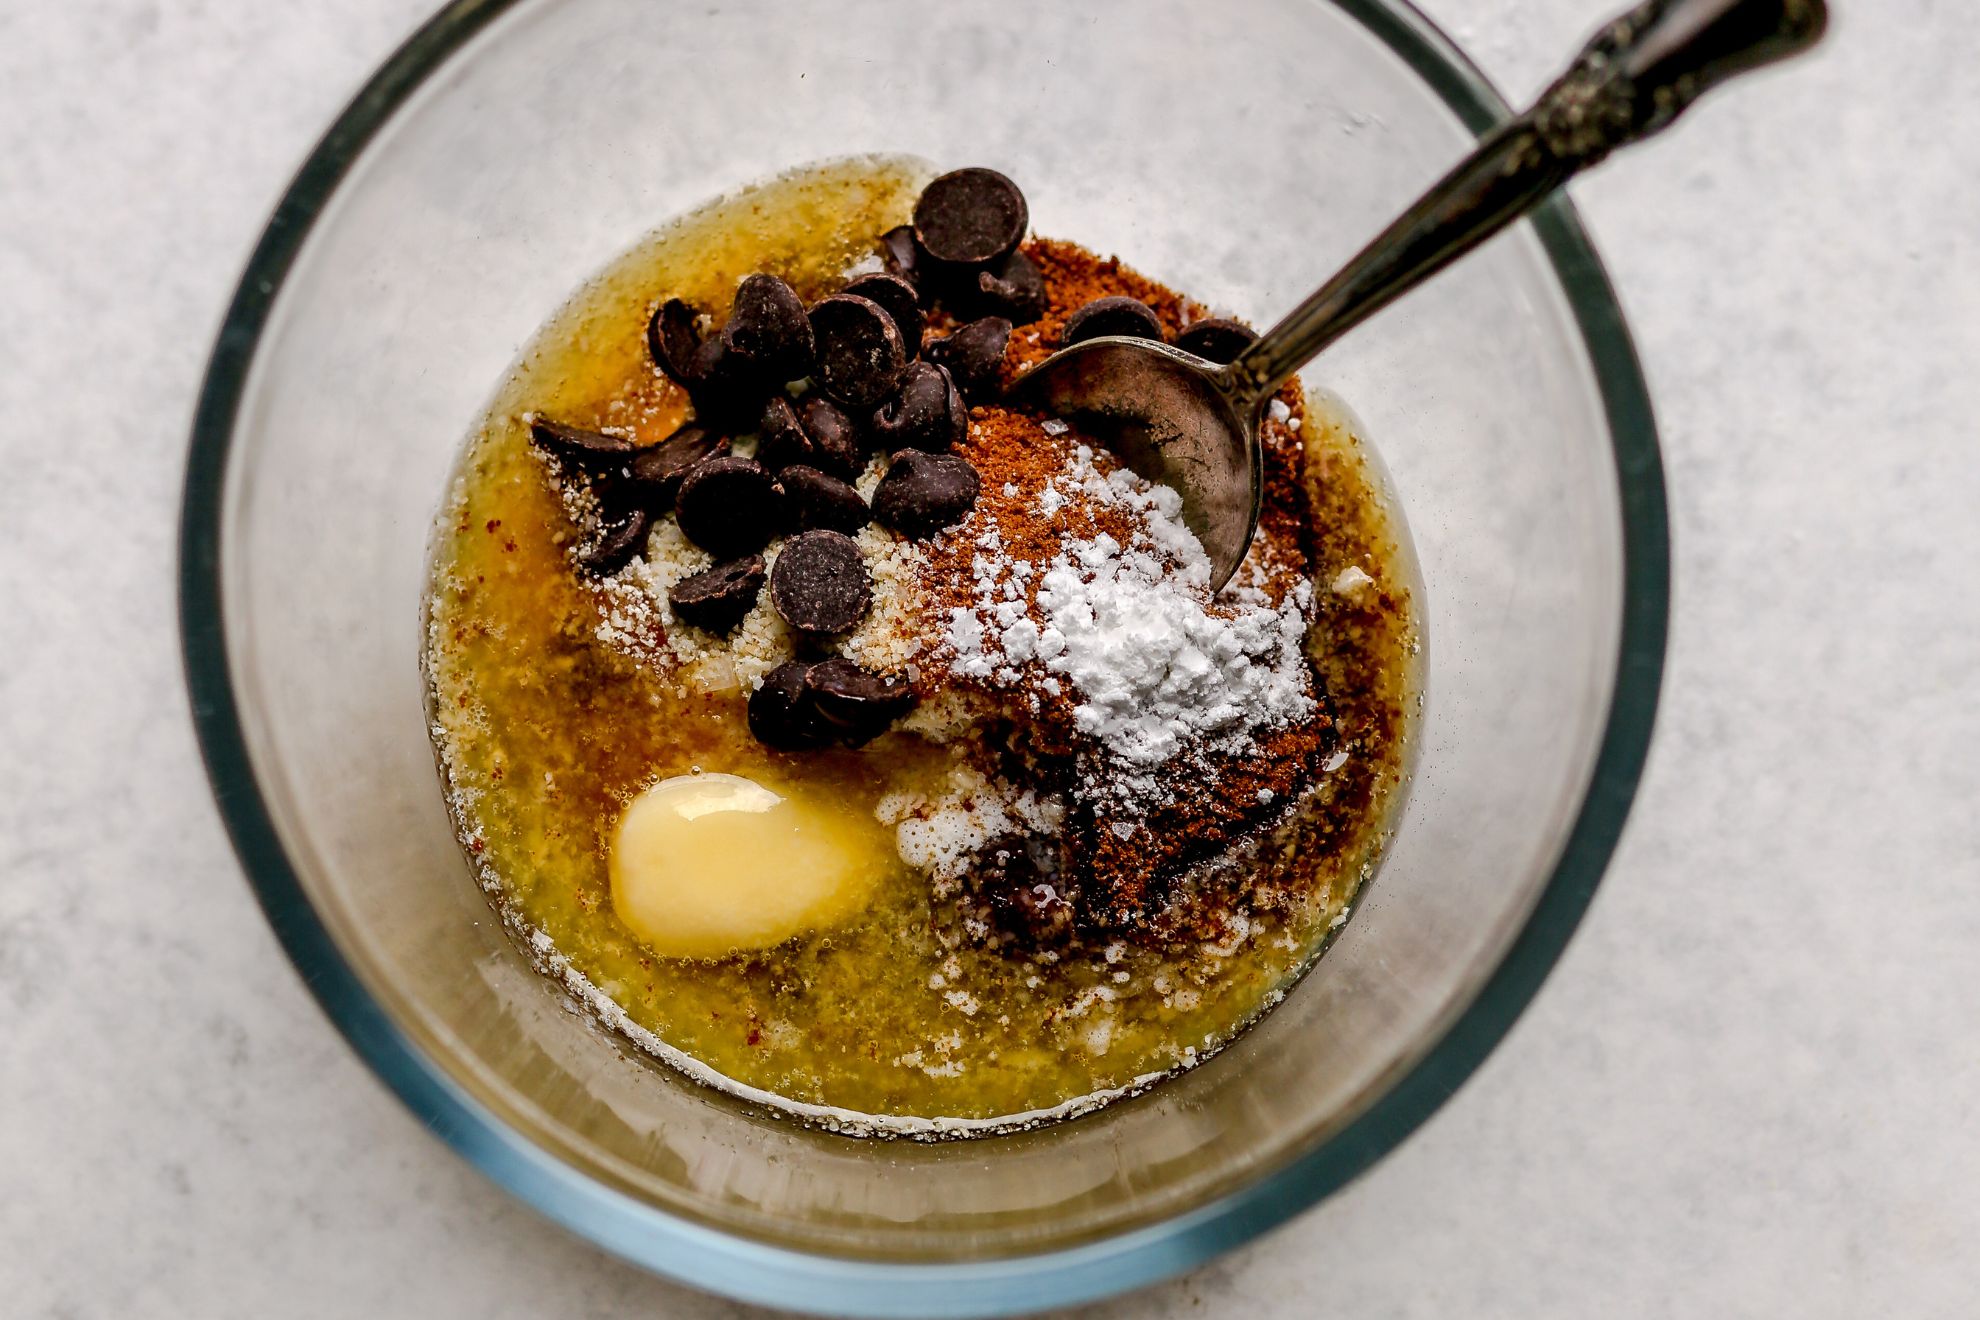 This is an overhead horizontal image of ingredients like melted butter, chocolate chips, coconut sugar, and baking powder in a glass bowl. A spoon is in the bowl, leaning against the right side. The bowl sits on a light grey surface.